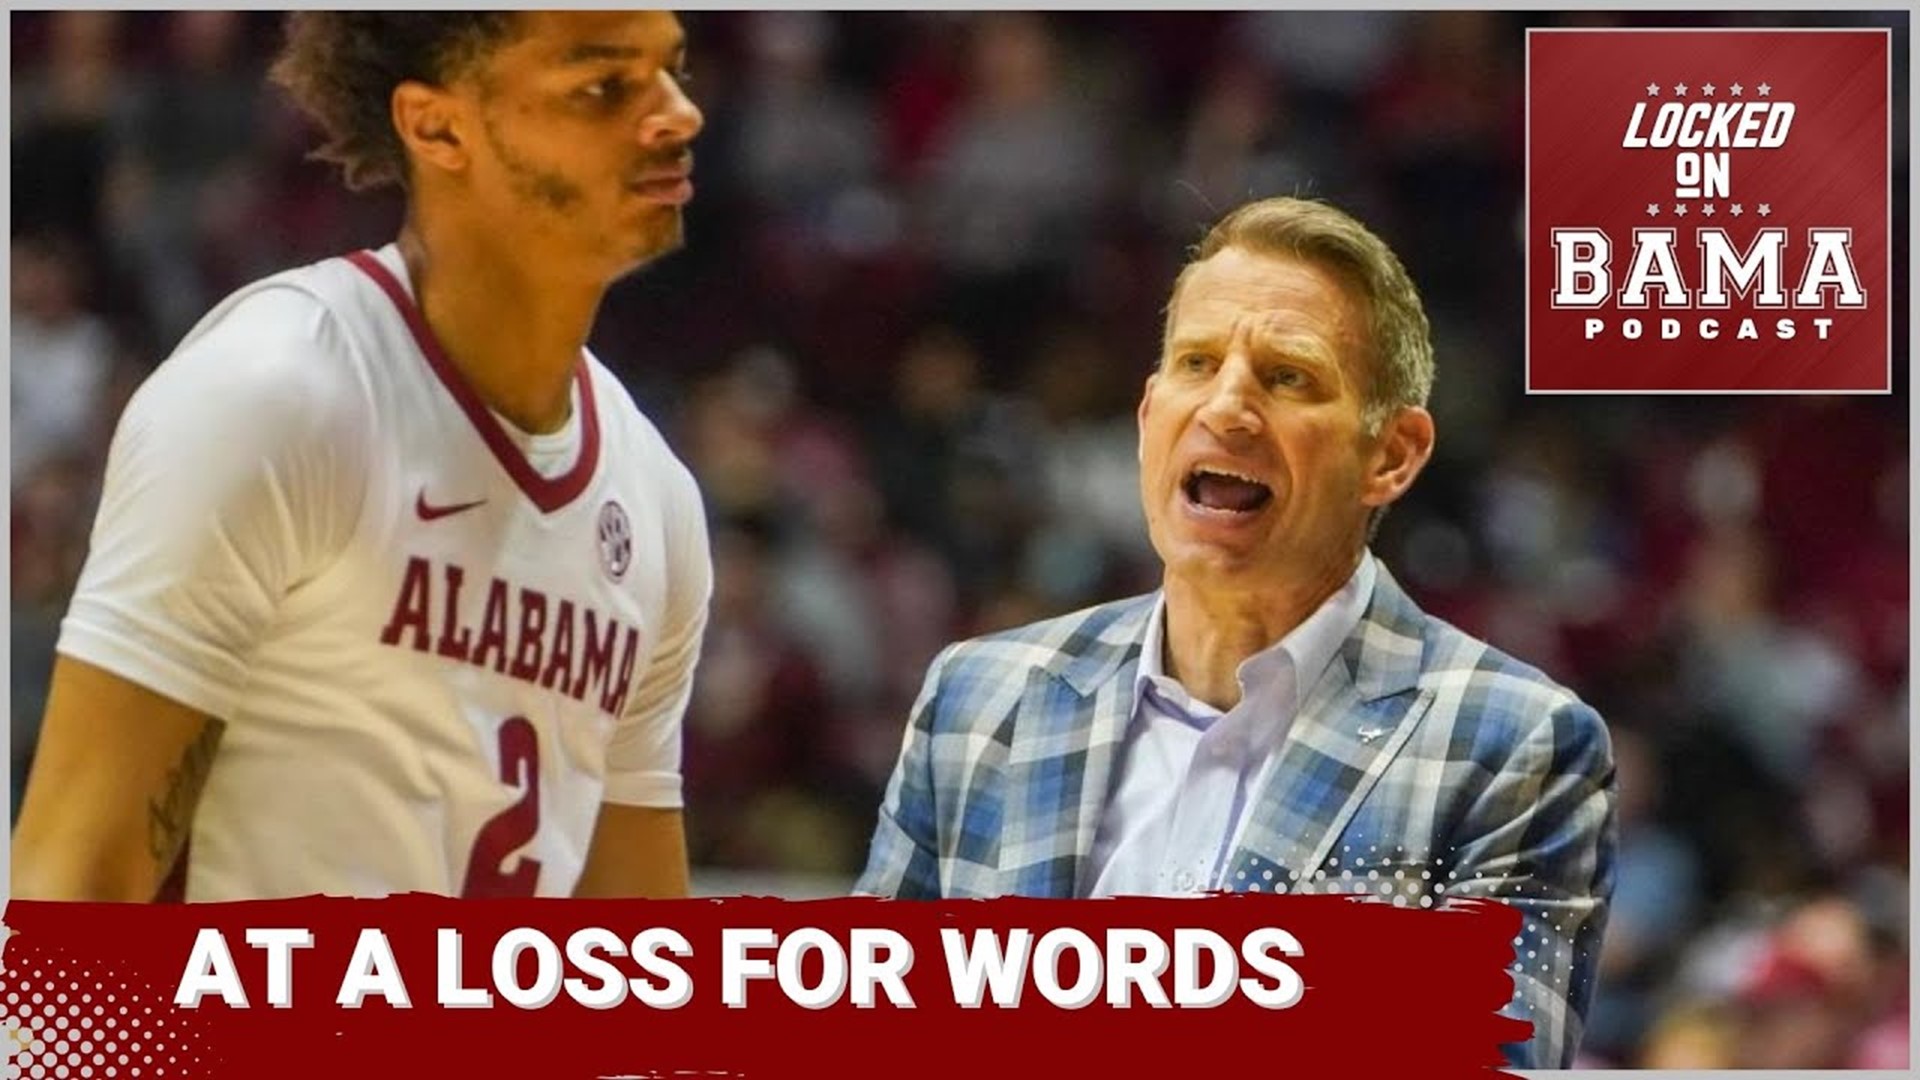 Tragedy from the weekend involving a former Alabama basketball player and football DC news